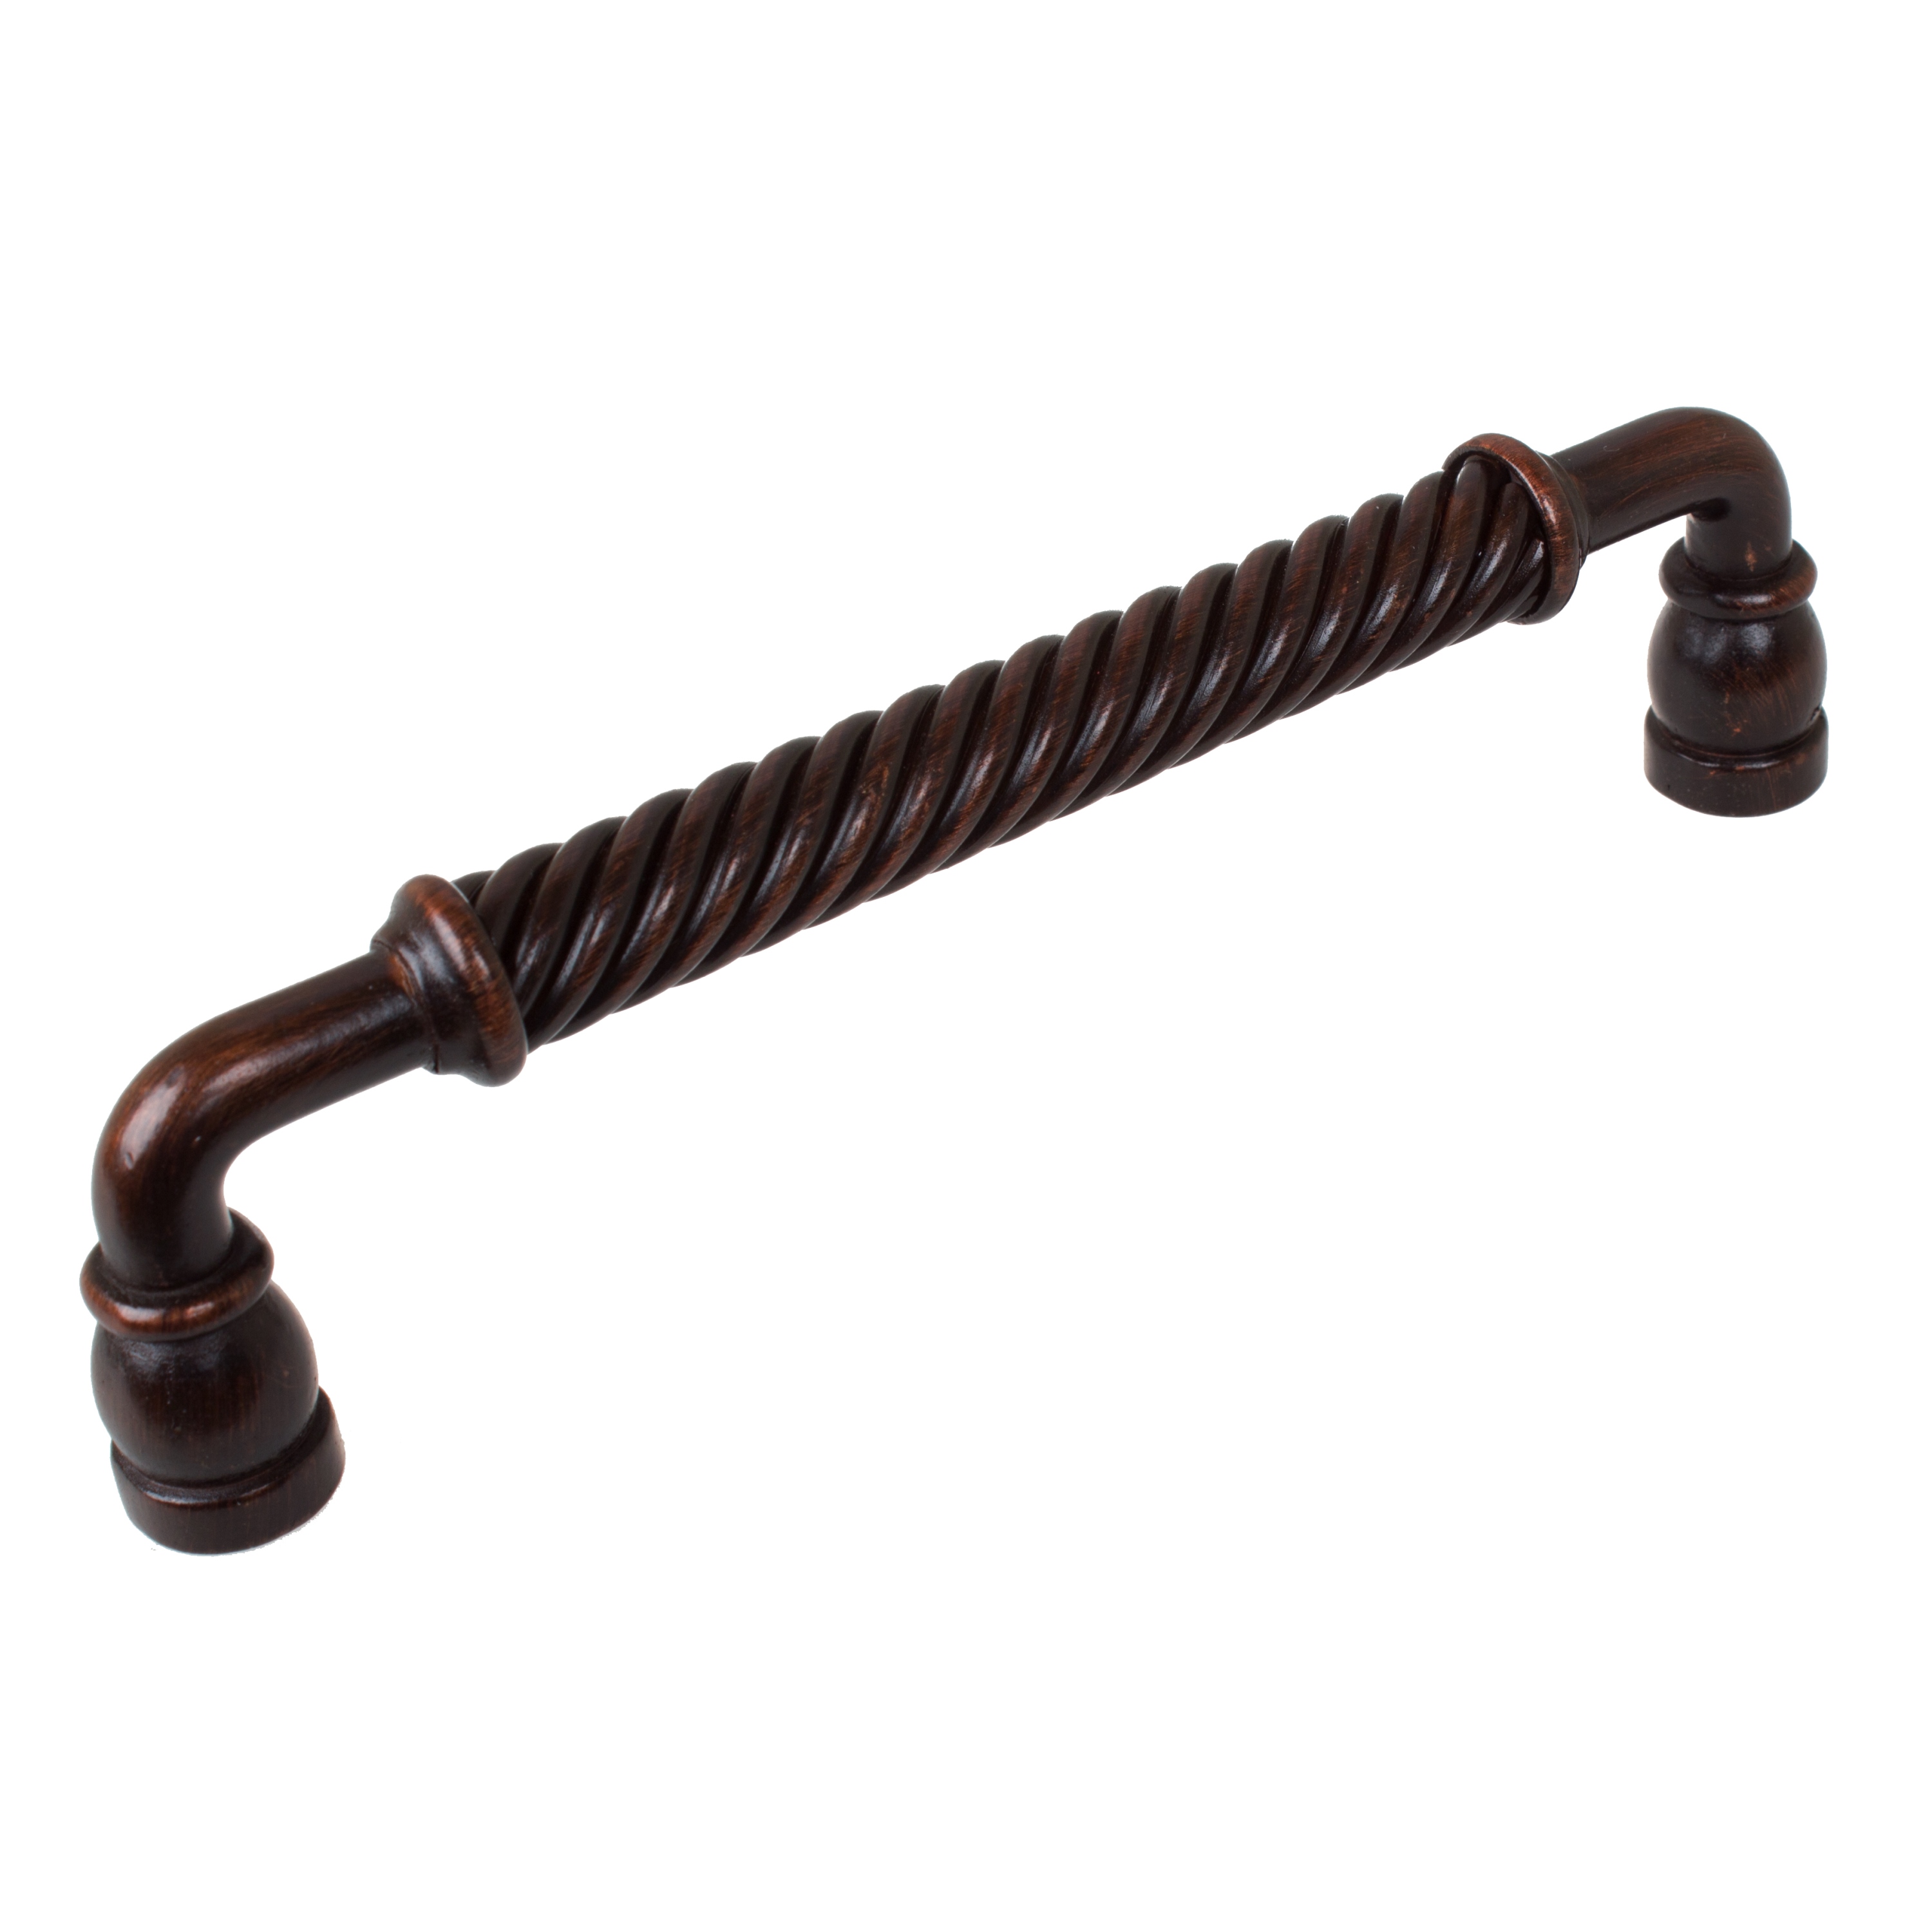 GlideRite 6-1/4 in. Center Rustic Bronze Twisted Cabinet Drawer Pull, Oil Rubbed Bronze - image 1 of 5